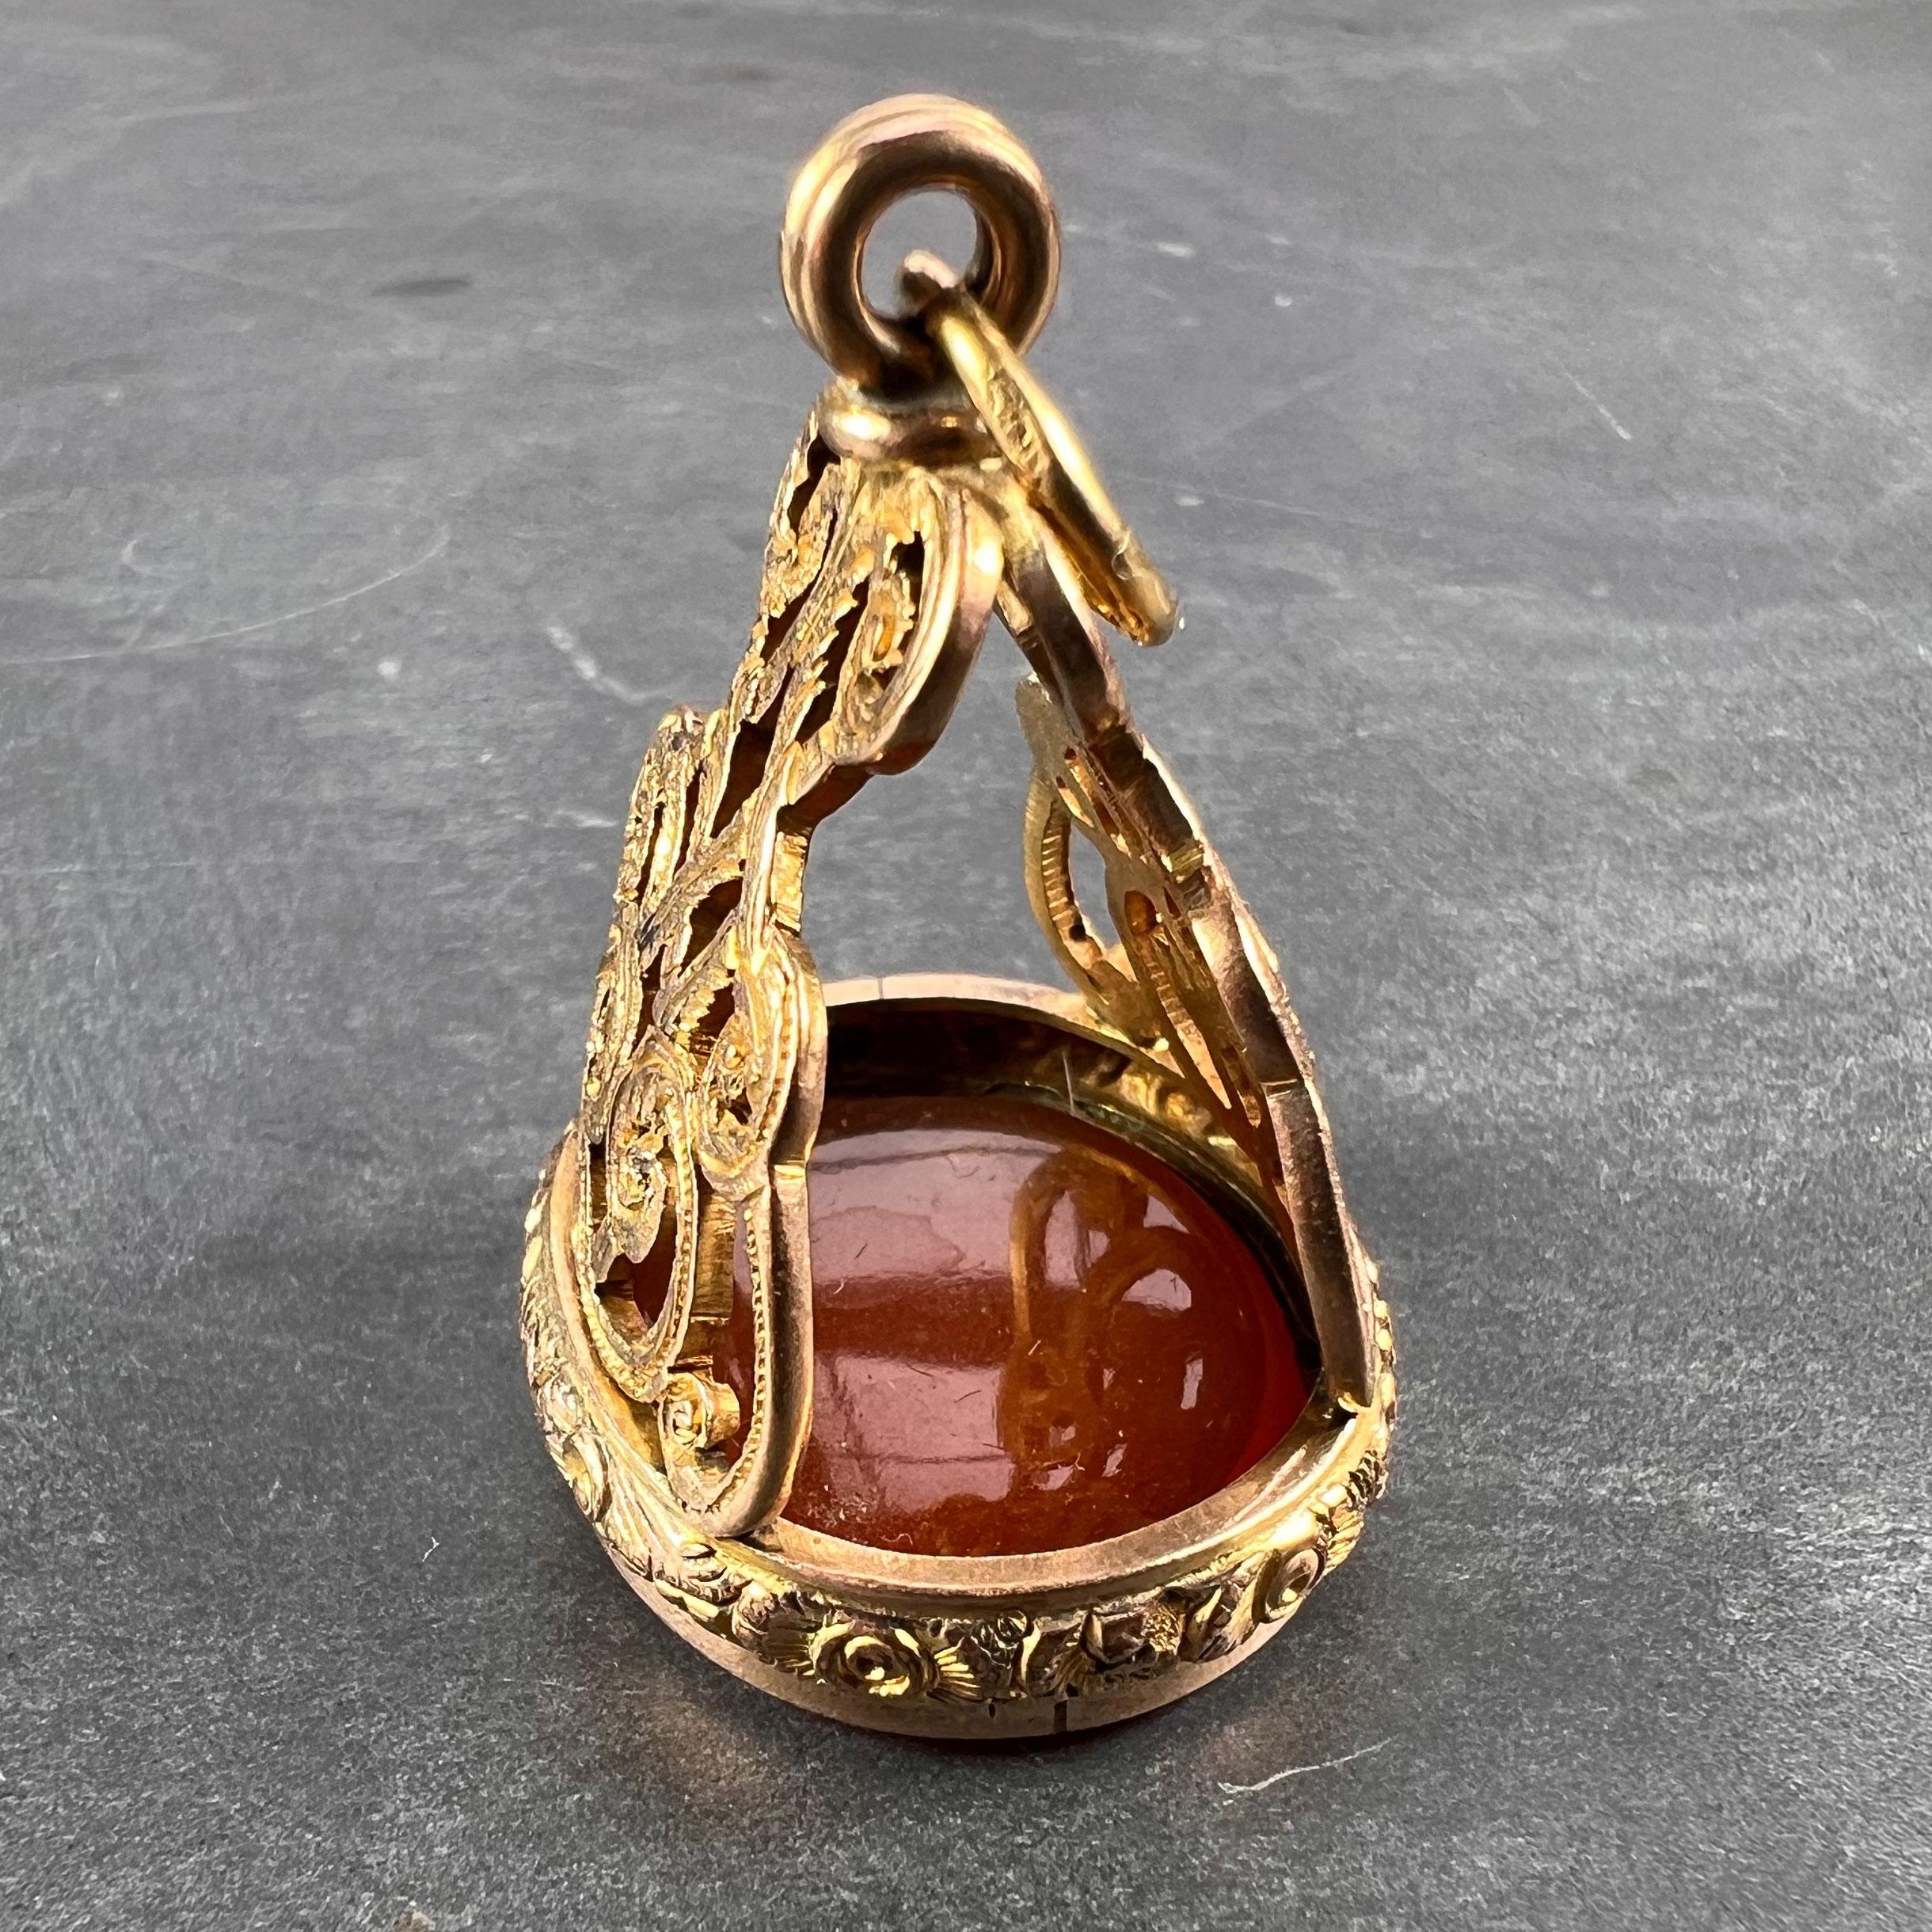 Oval Cut Large Carnelian Yellow Gold Fob Charm Pendant For Sale